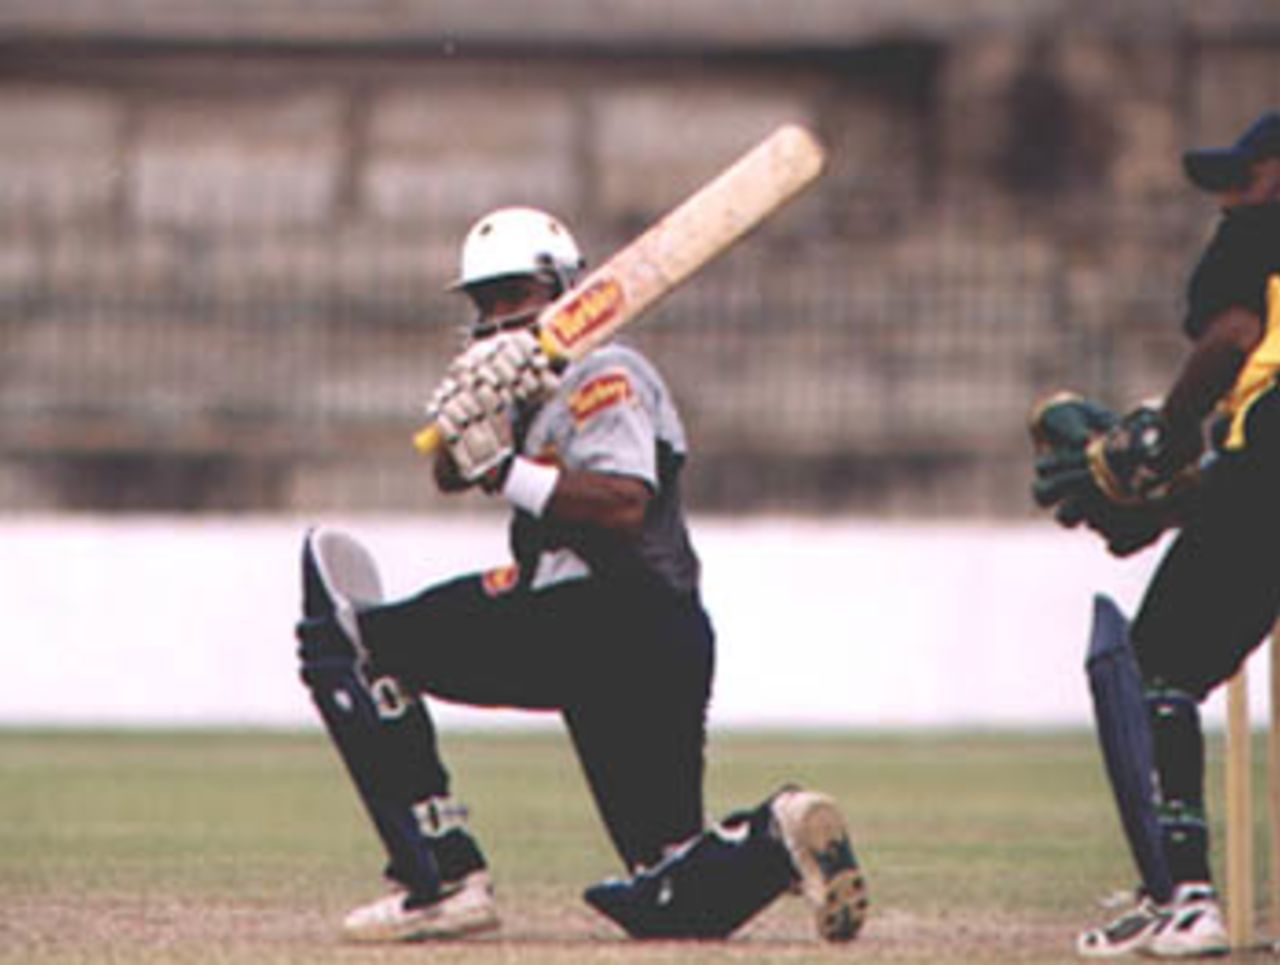 Dulip Samaraweera saves Colts CC with an unbeaten 81 runs against SSC in the Premier Limited Over Tournament 2000 finals